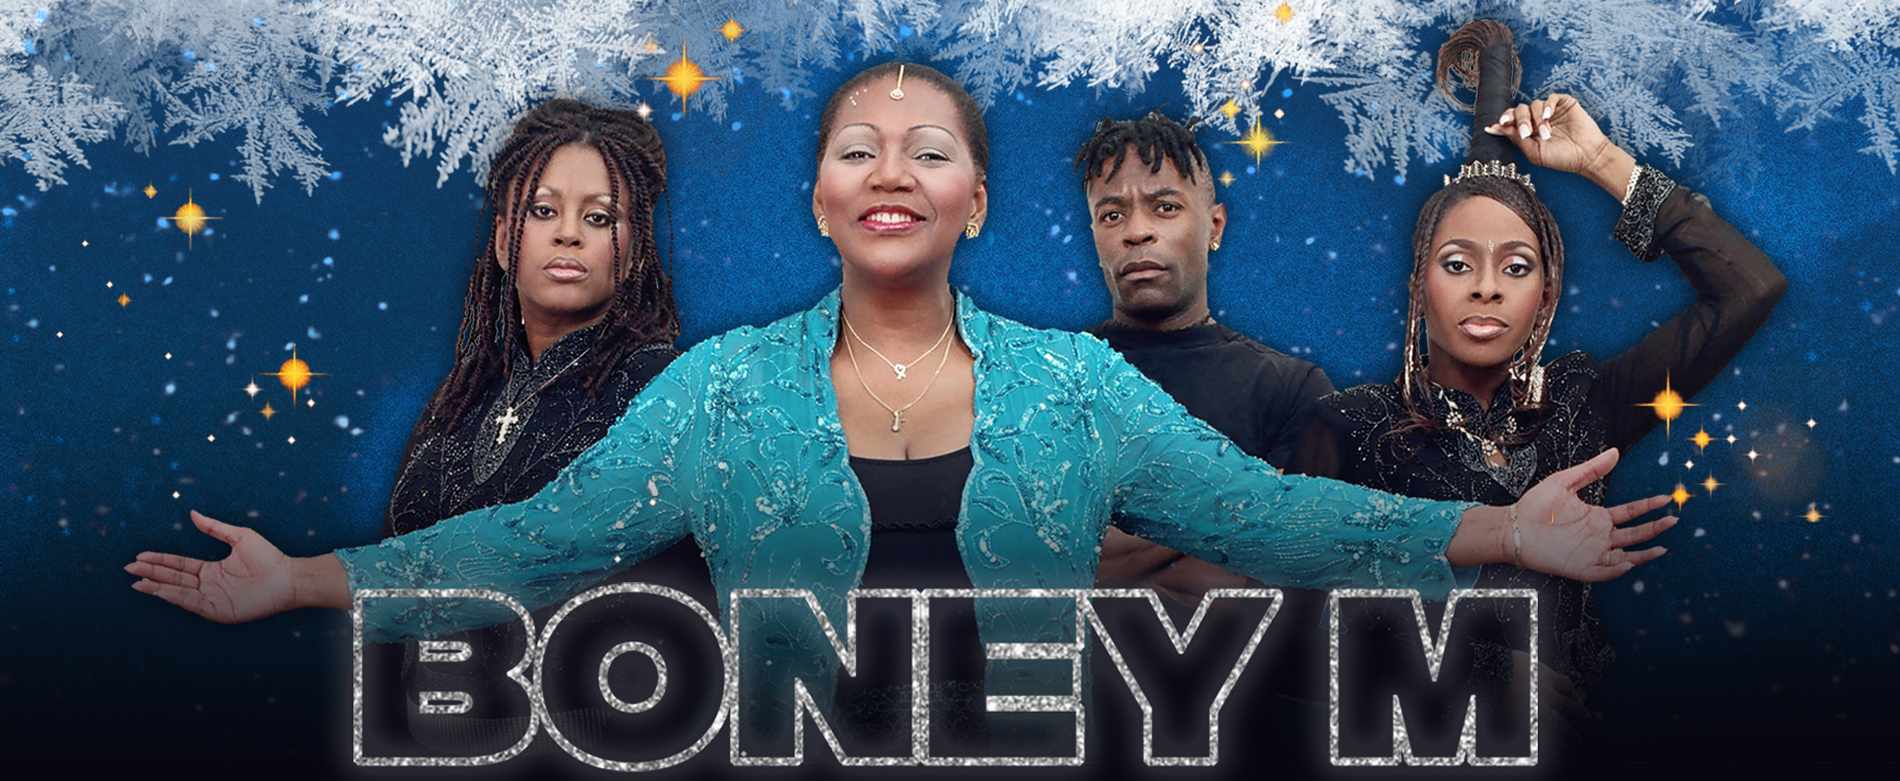 Christmas with Boney M in 2019